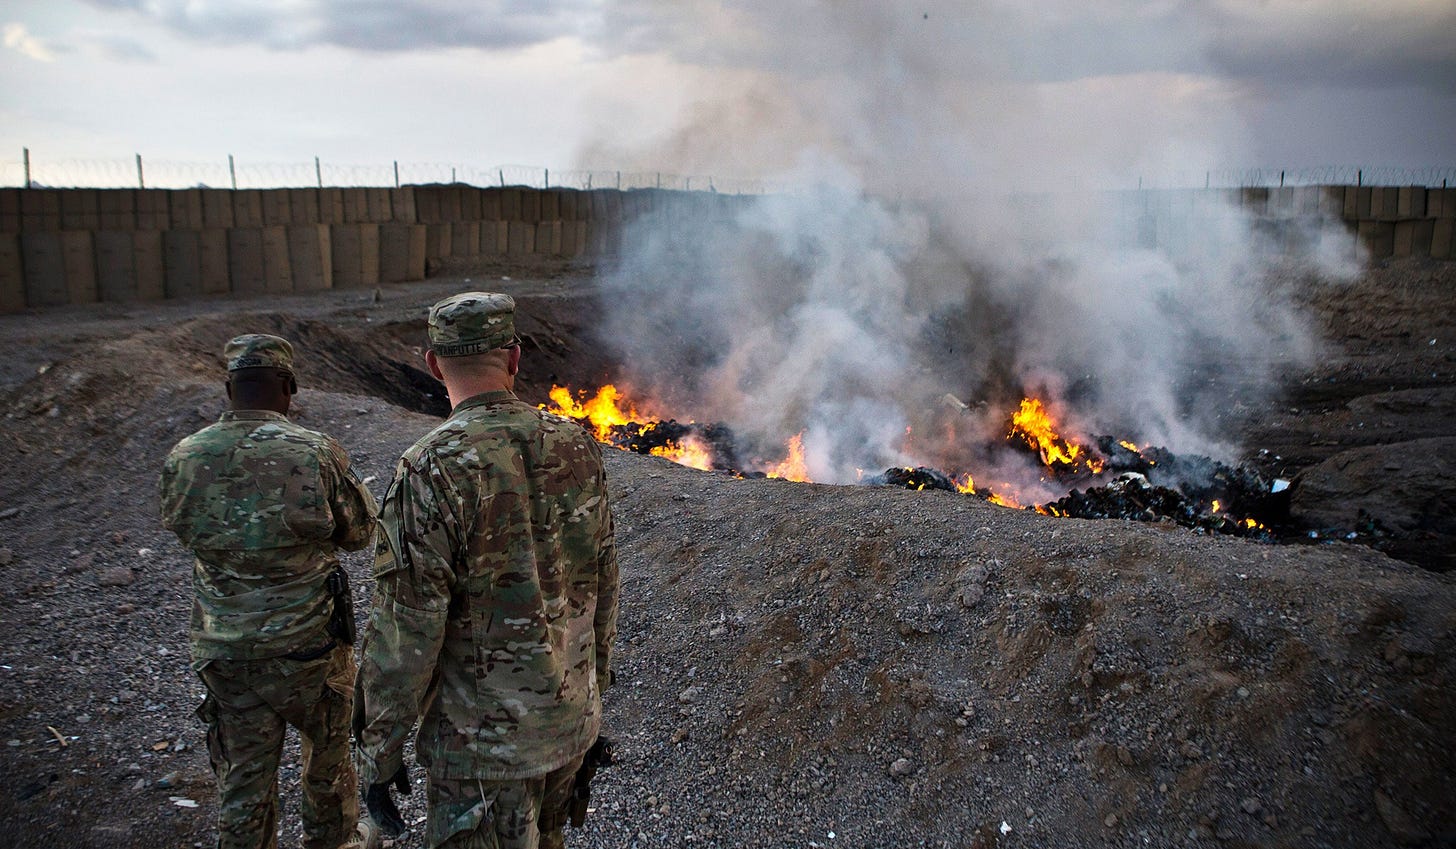 Two soldiers monitor a burn pit in Afghanistan.